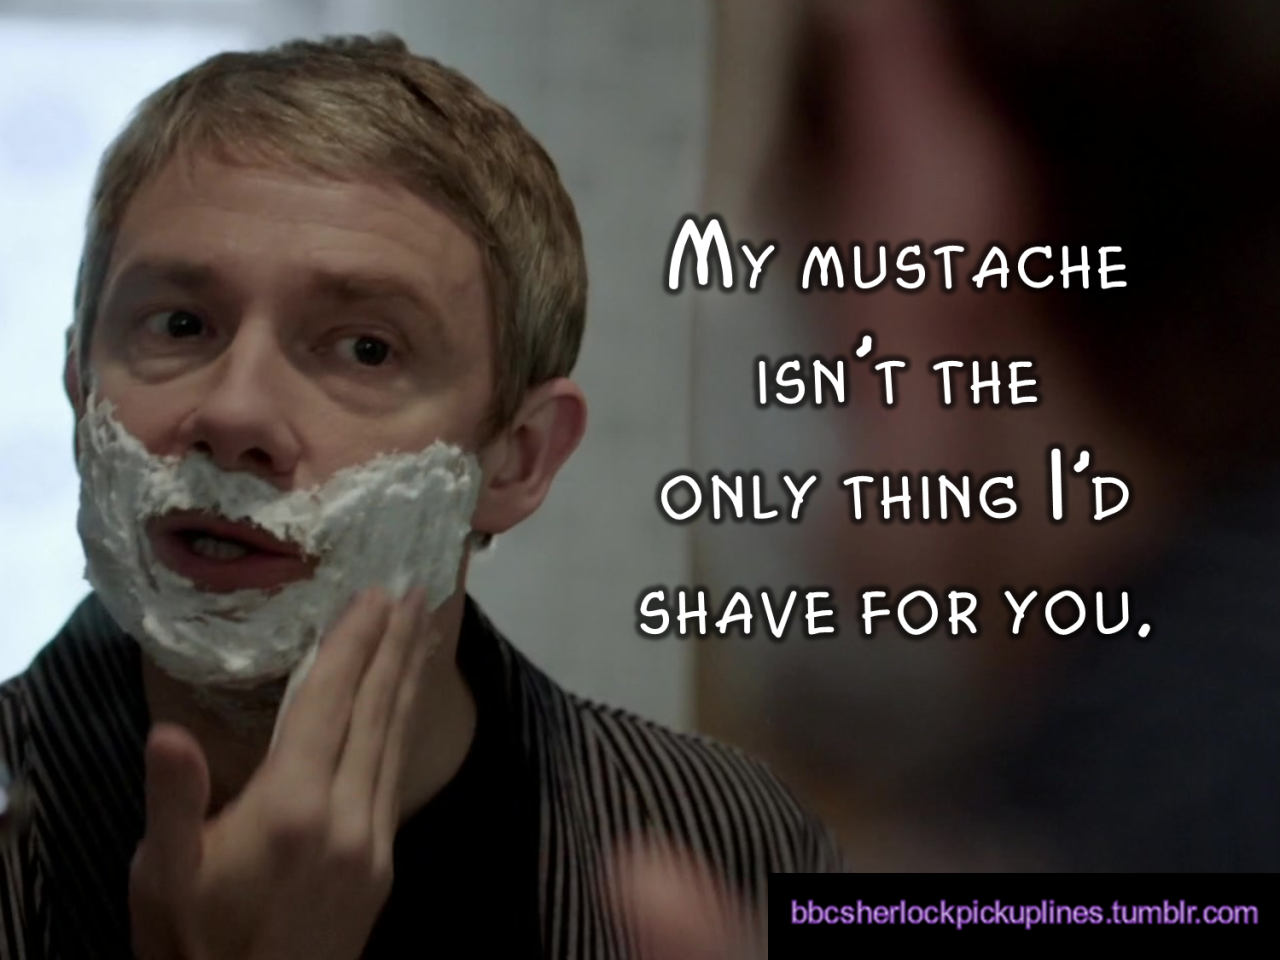 &ldquo;My mustache isn&rsquo;t the only thing I&rsquo;d shave for you.&rdquo;